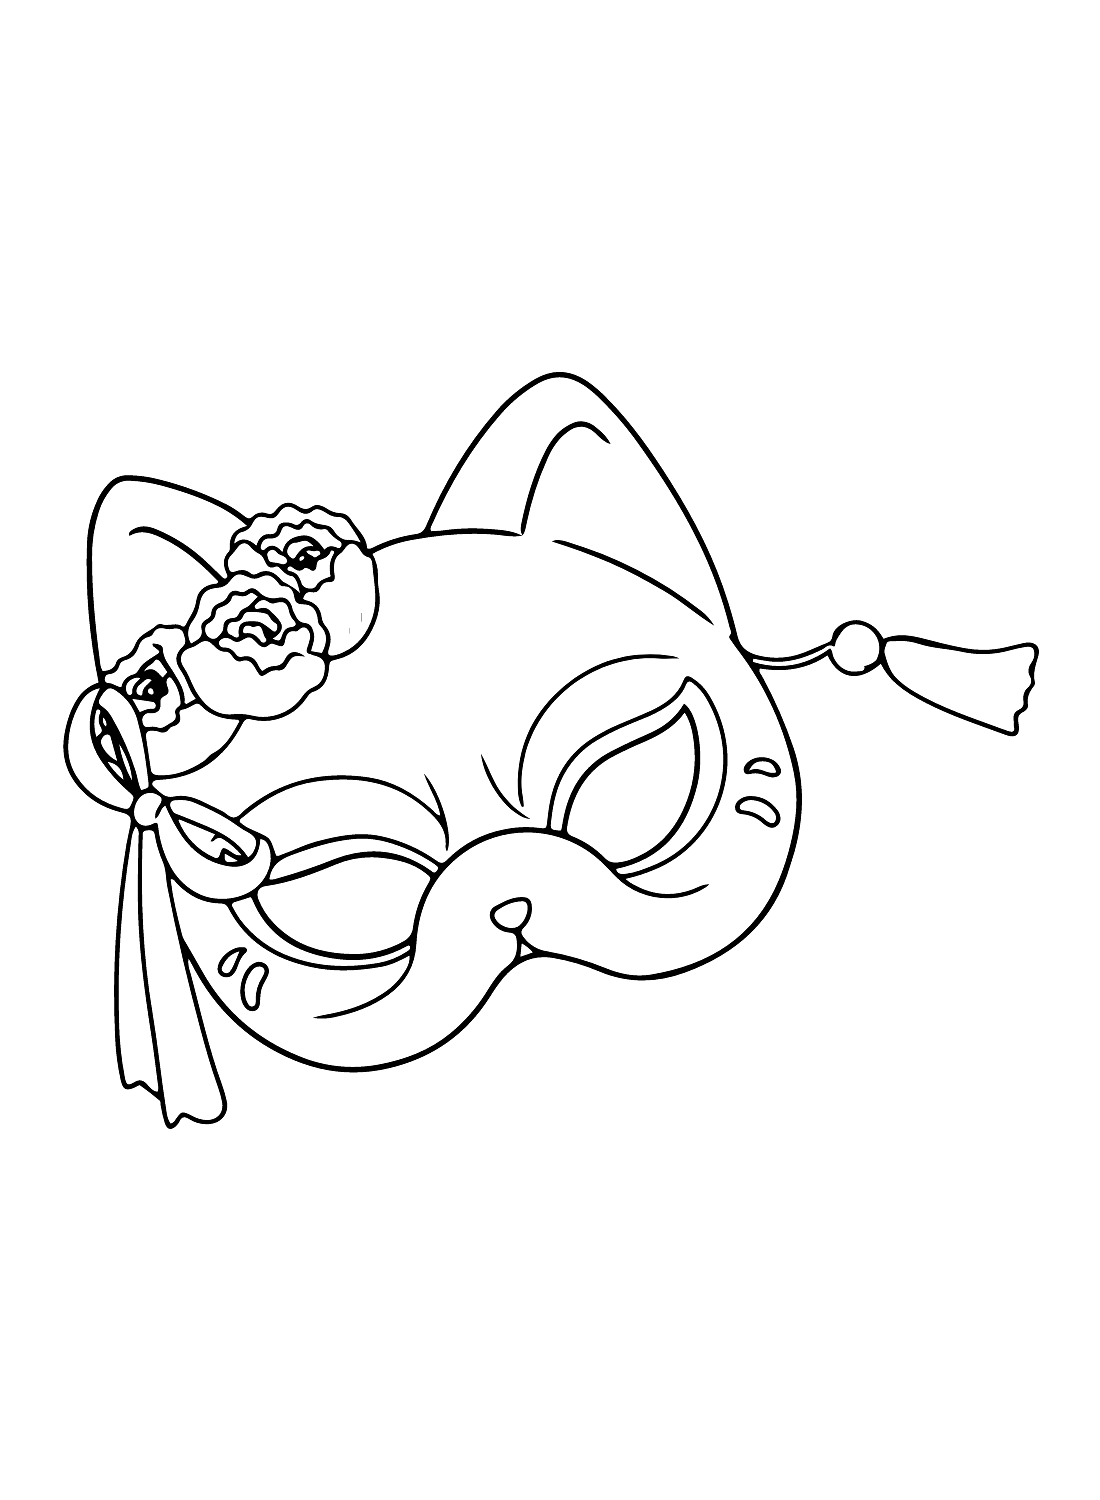 Fox Mask Coloring Page